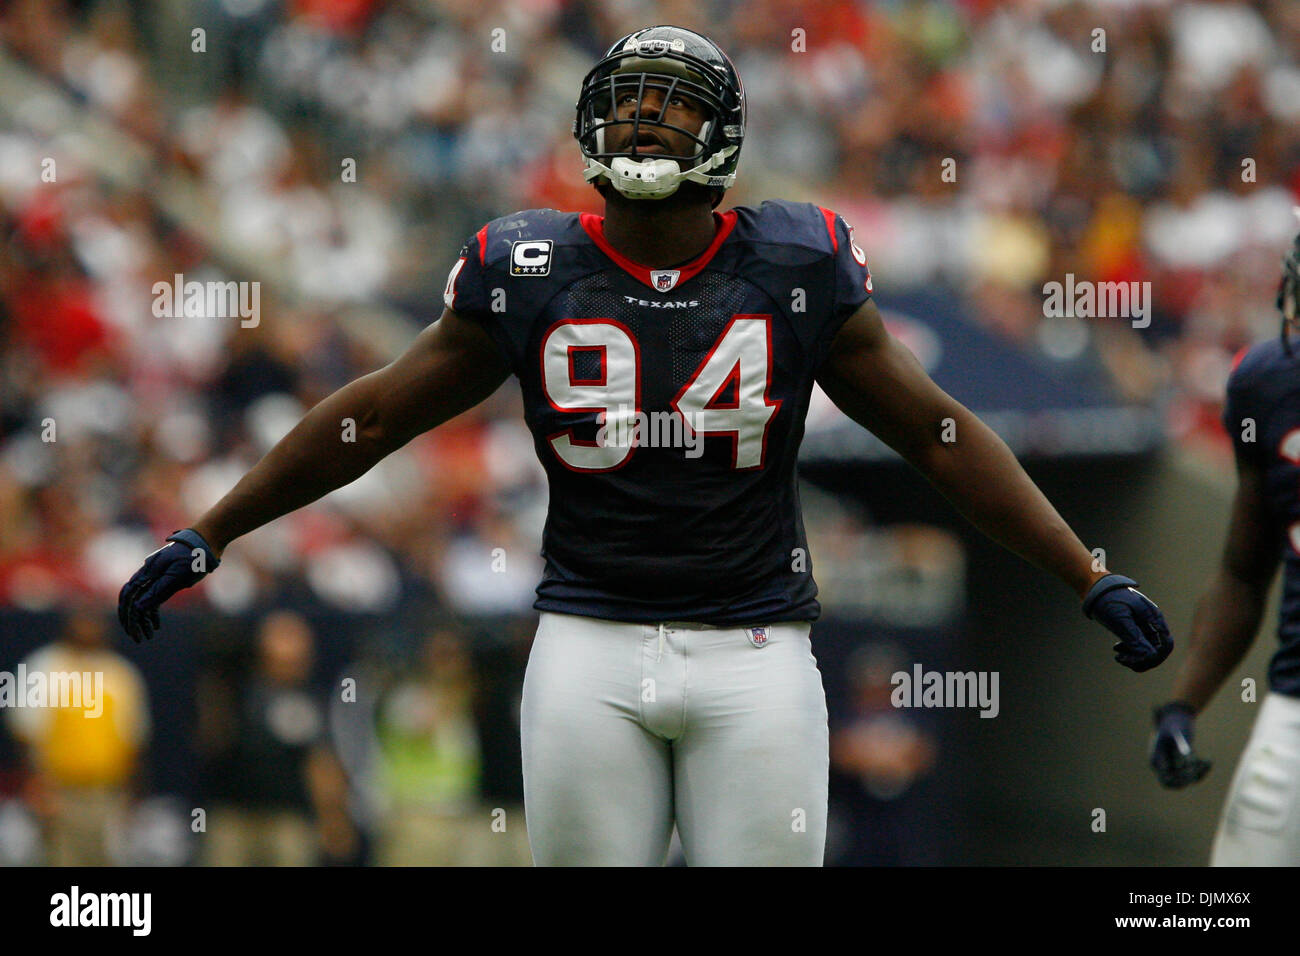 Sept. 26, 2010 - Houston, Texas, United States of America - Houston Texans defensive end Antonio Smith #94 looks up at the scoreboard during a timeout during the game between the Dallas Cowboys and the Houston Texans at Reliant Stadium in Houston, Texas. The Cowboys beat the Texans 27-13. (Credit Image: © Matt Pearce/Southcreek Global/ZUMApress.com) Stock Photo